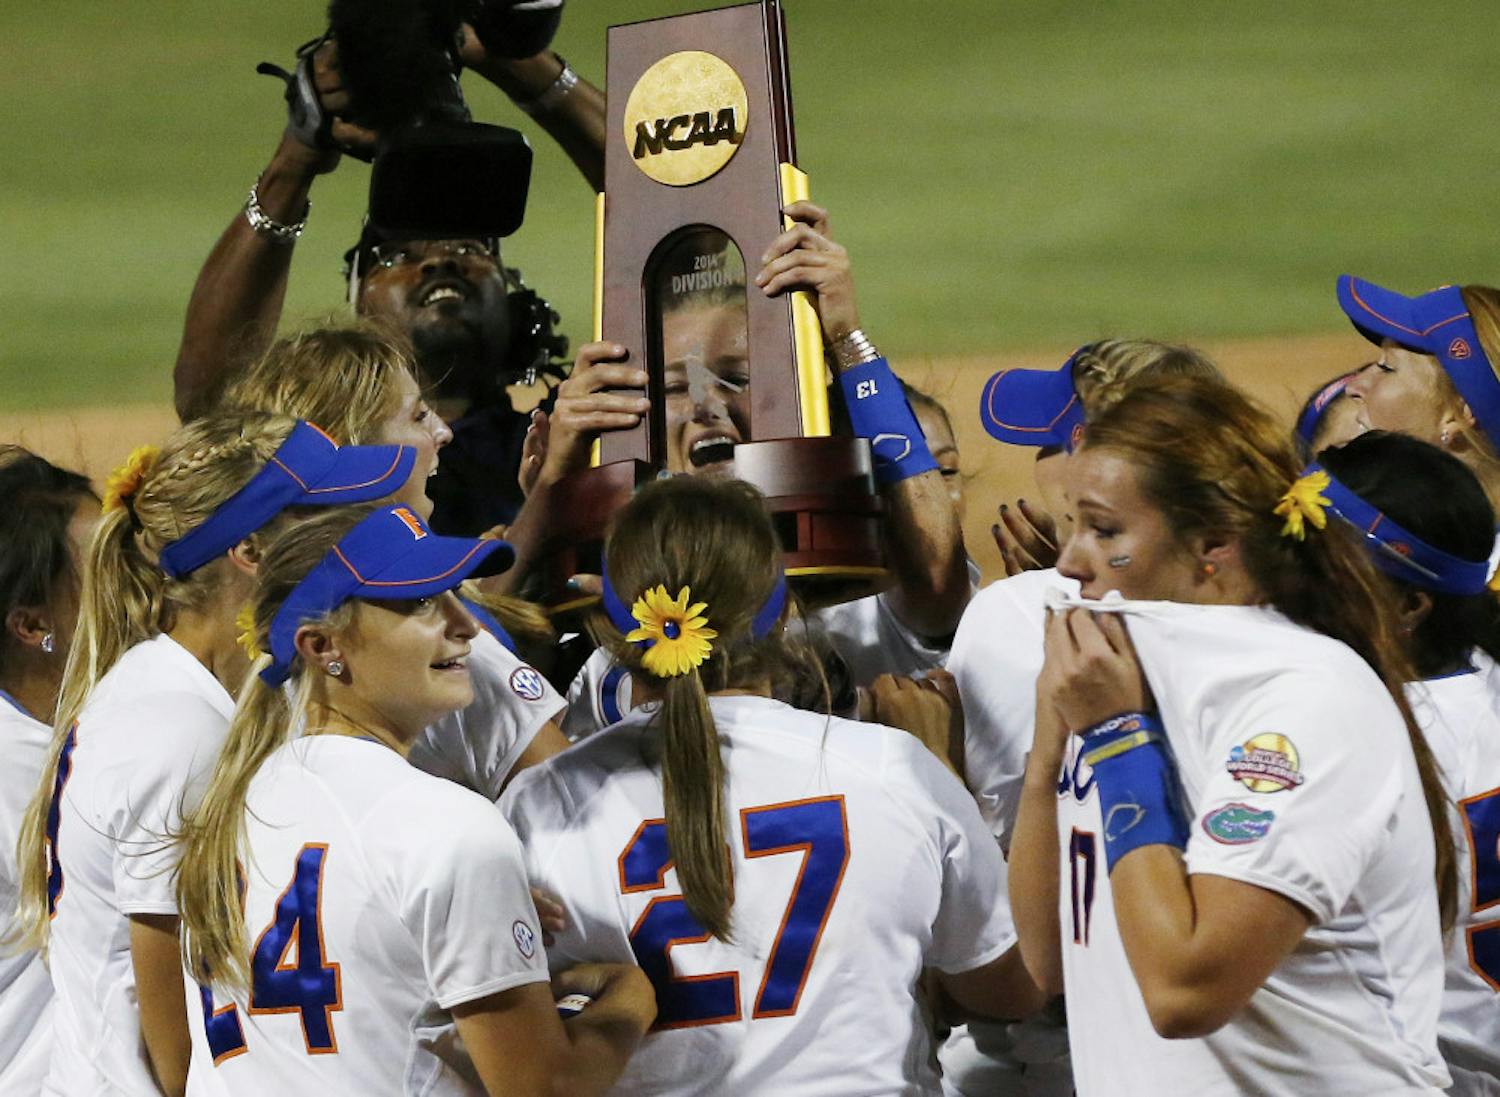 Hannah Rogers holds the trophy as the Gators celebrate their first NCAA championship after defeating Alabama 6-3 in Oklahoma City, Okla., on June 3. Florida sweeped the final series in two games.